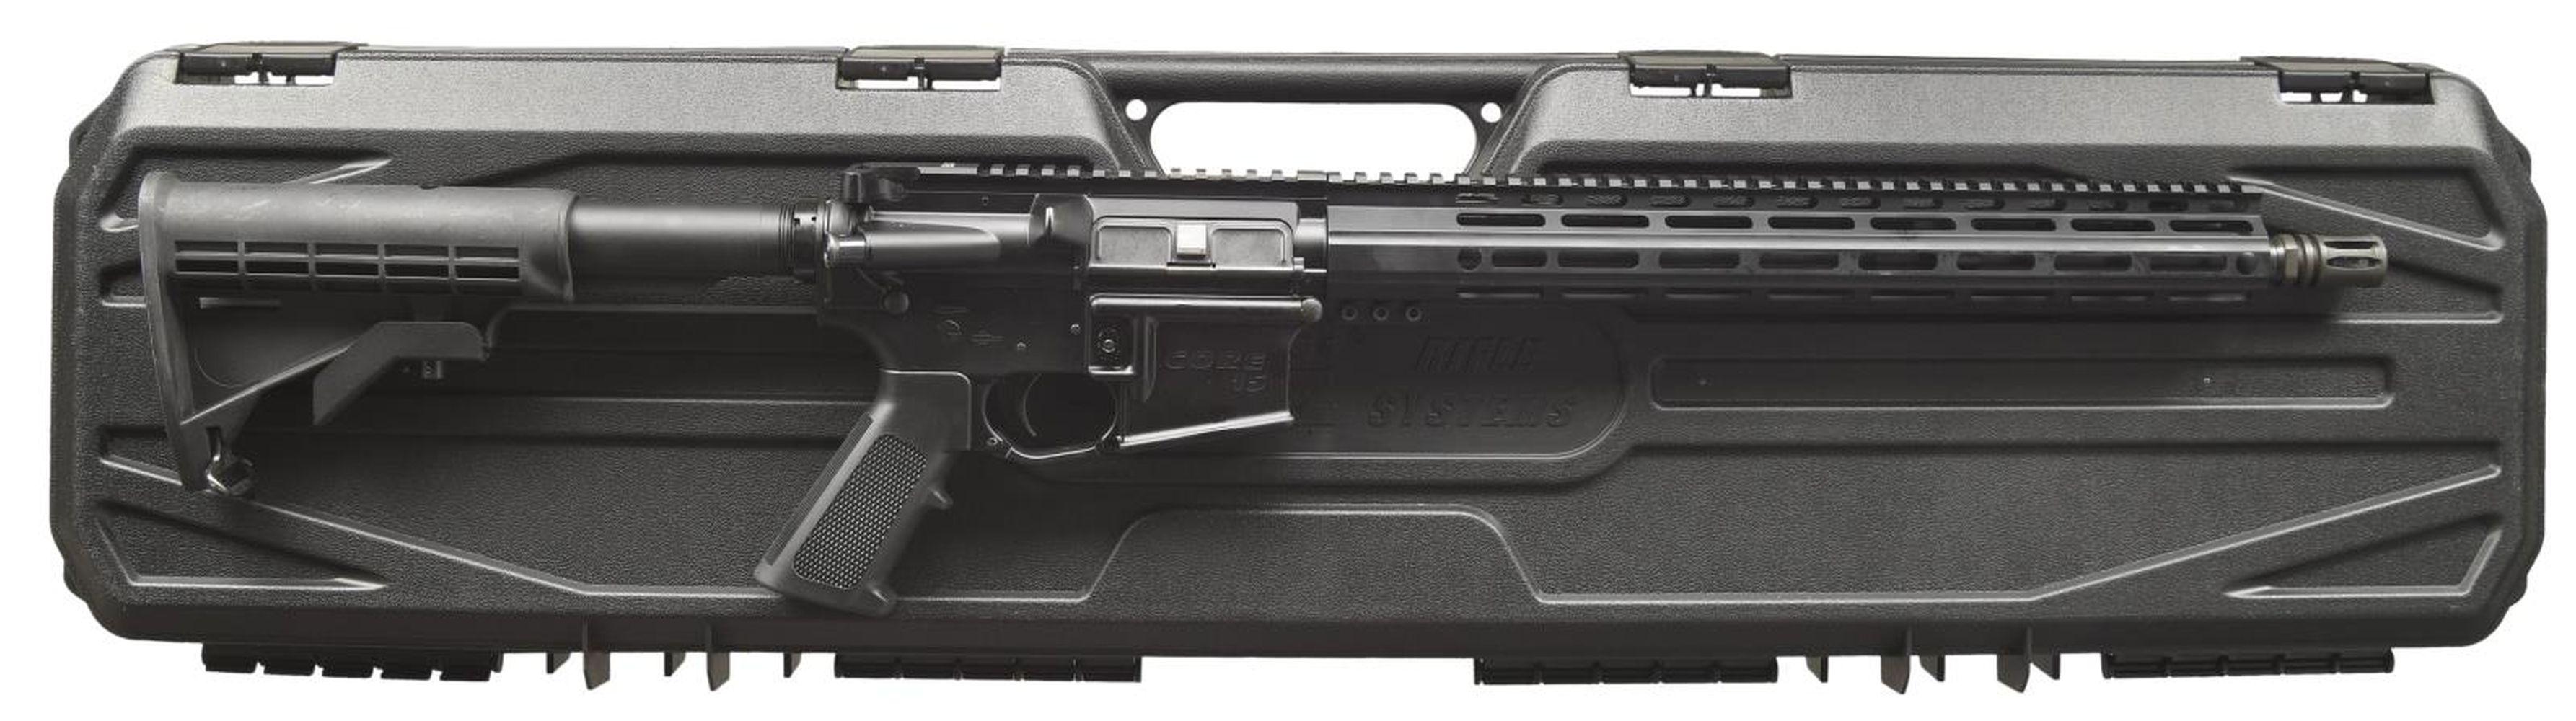 GOOD TIME OUTDOORS CORE 15 M-LOK SCOUT